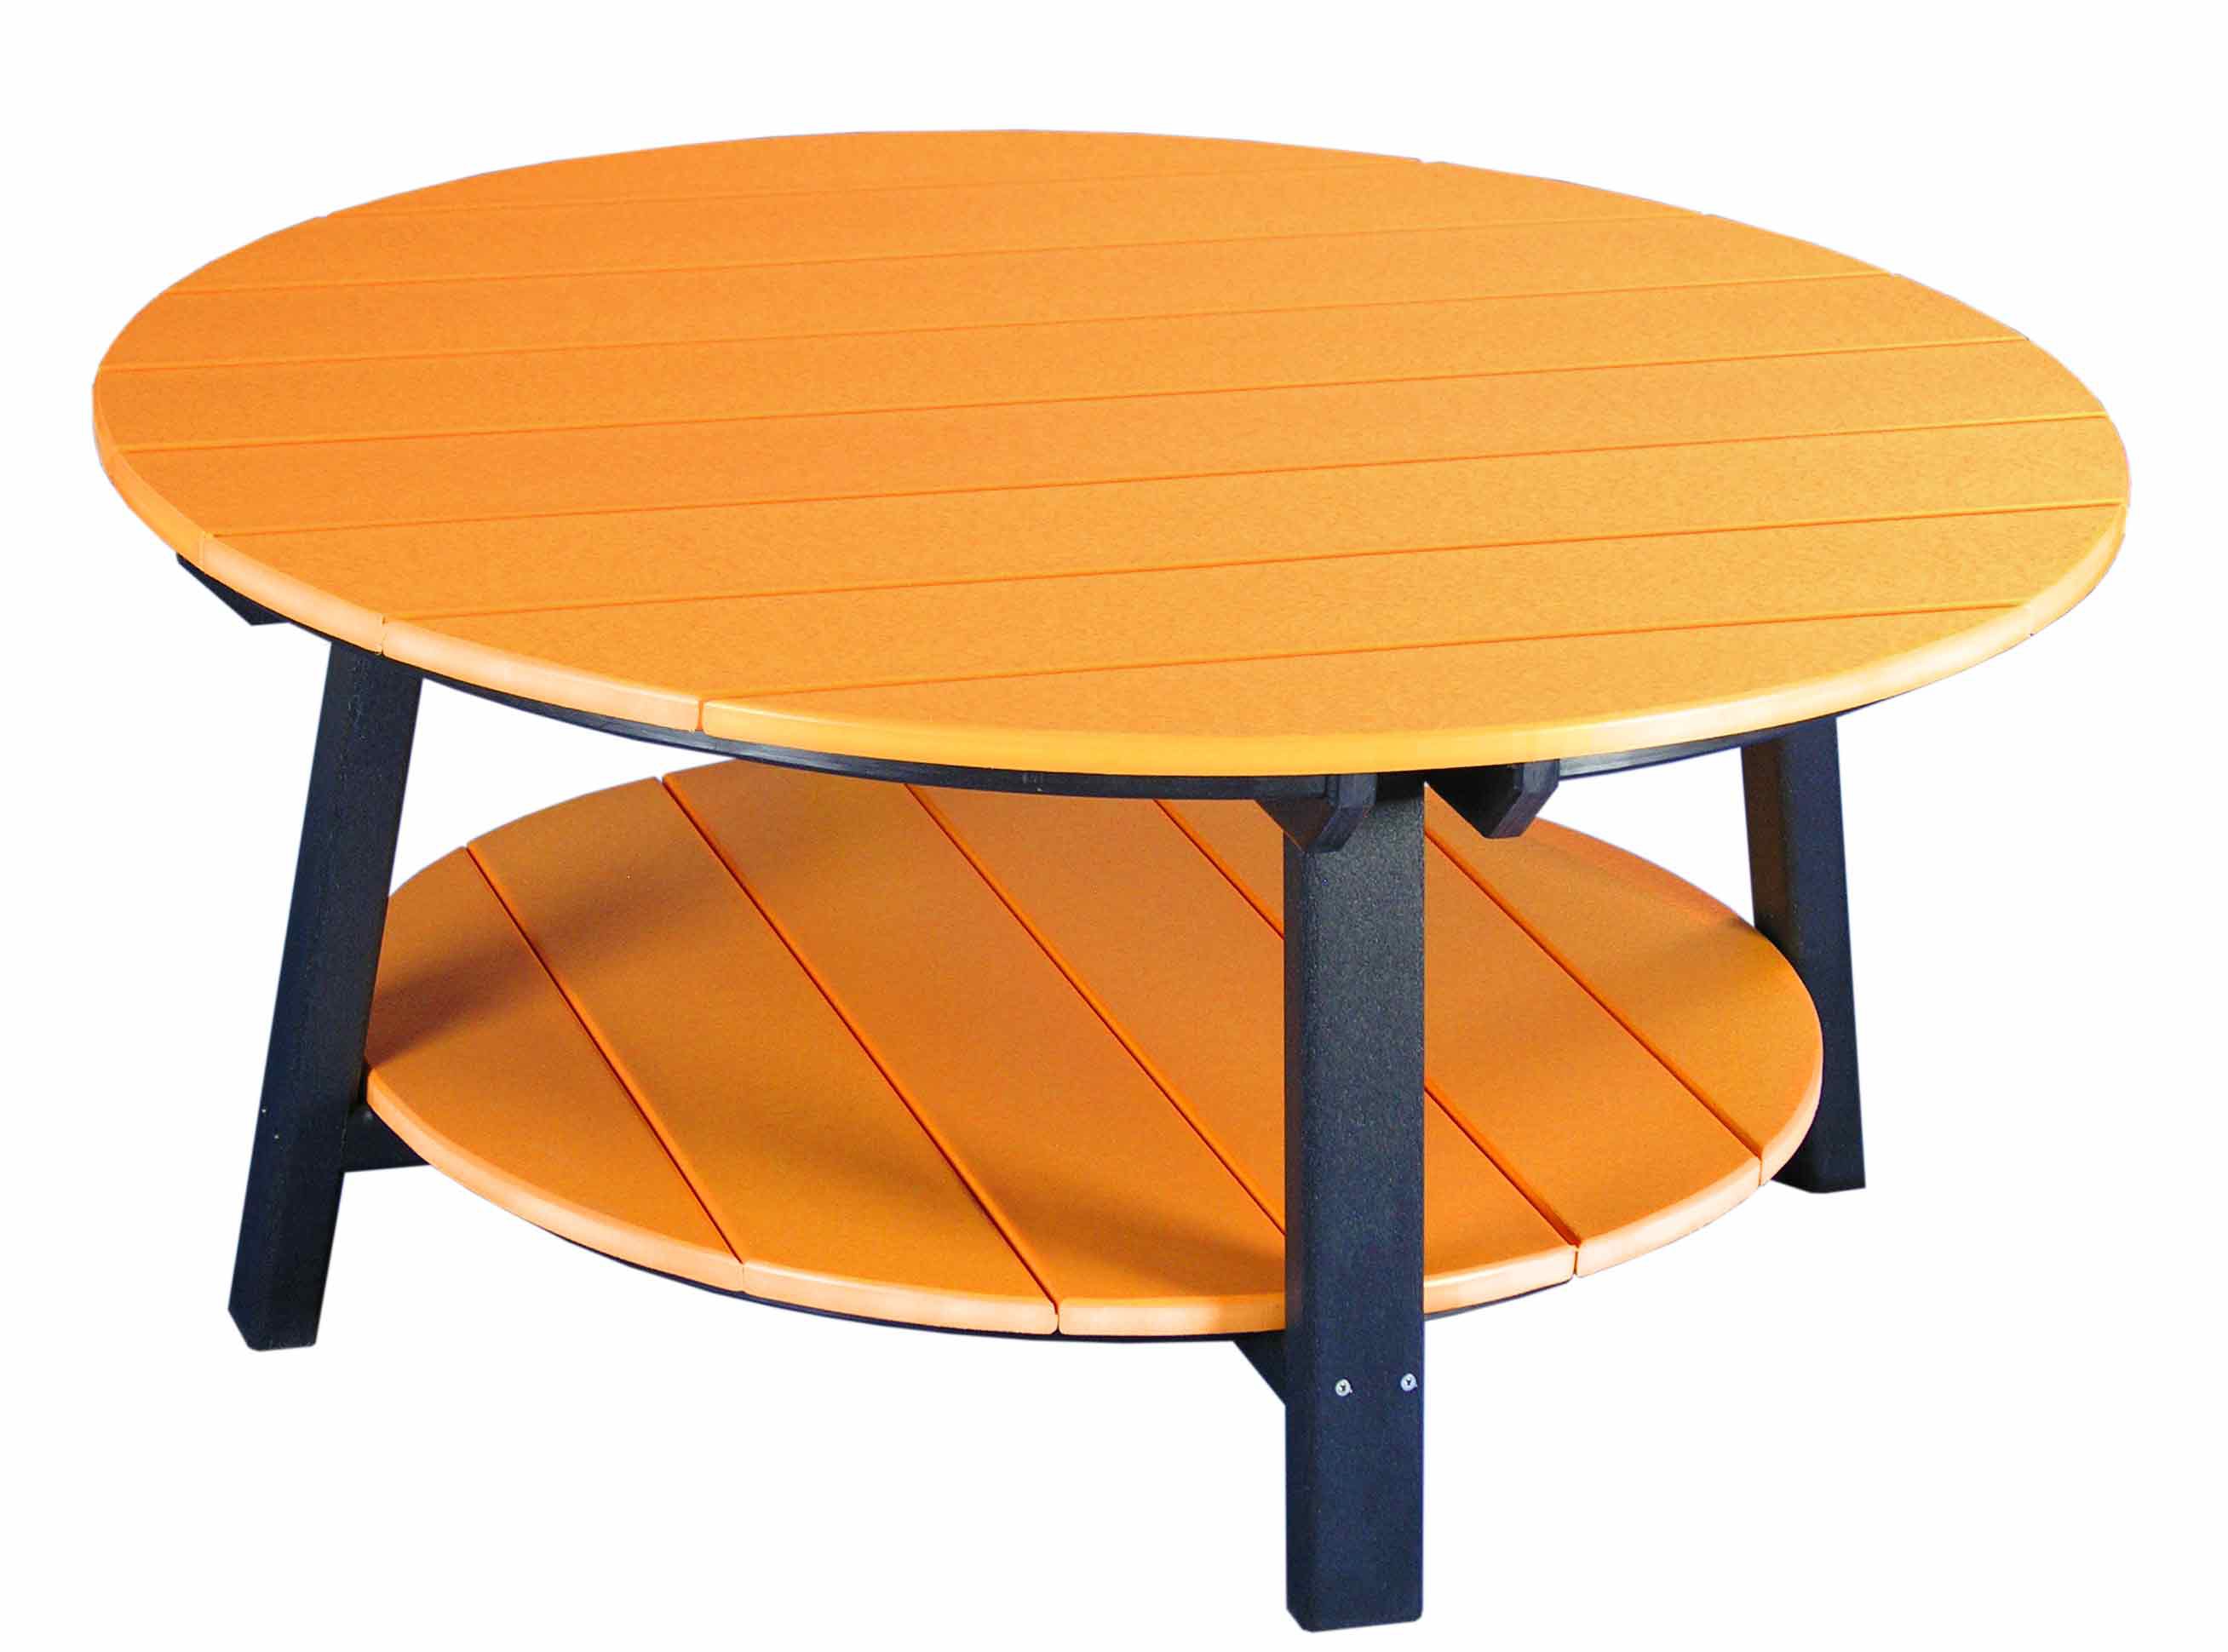 Crestville Deluxe Conversation Table in Solid Tropical Colors